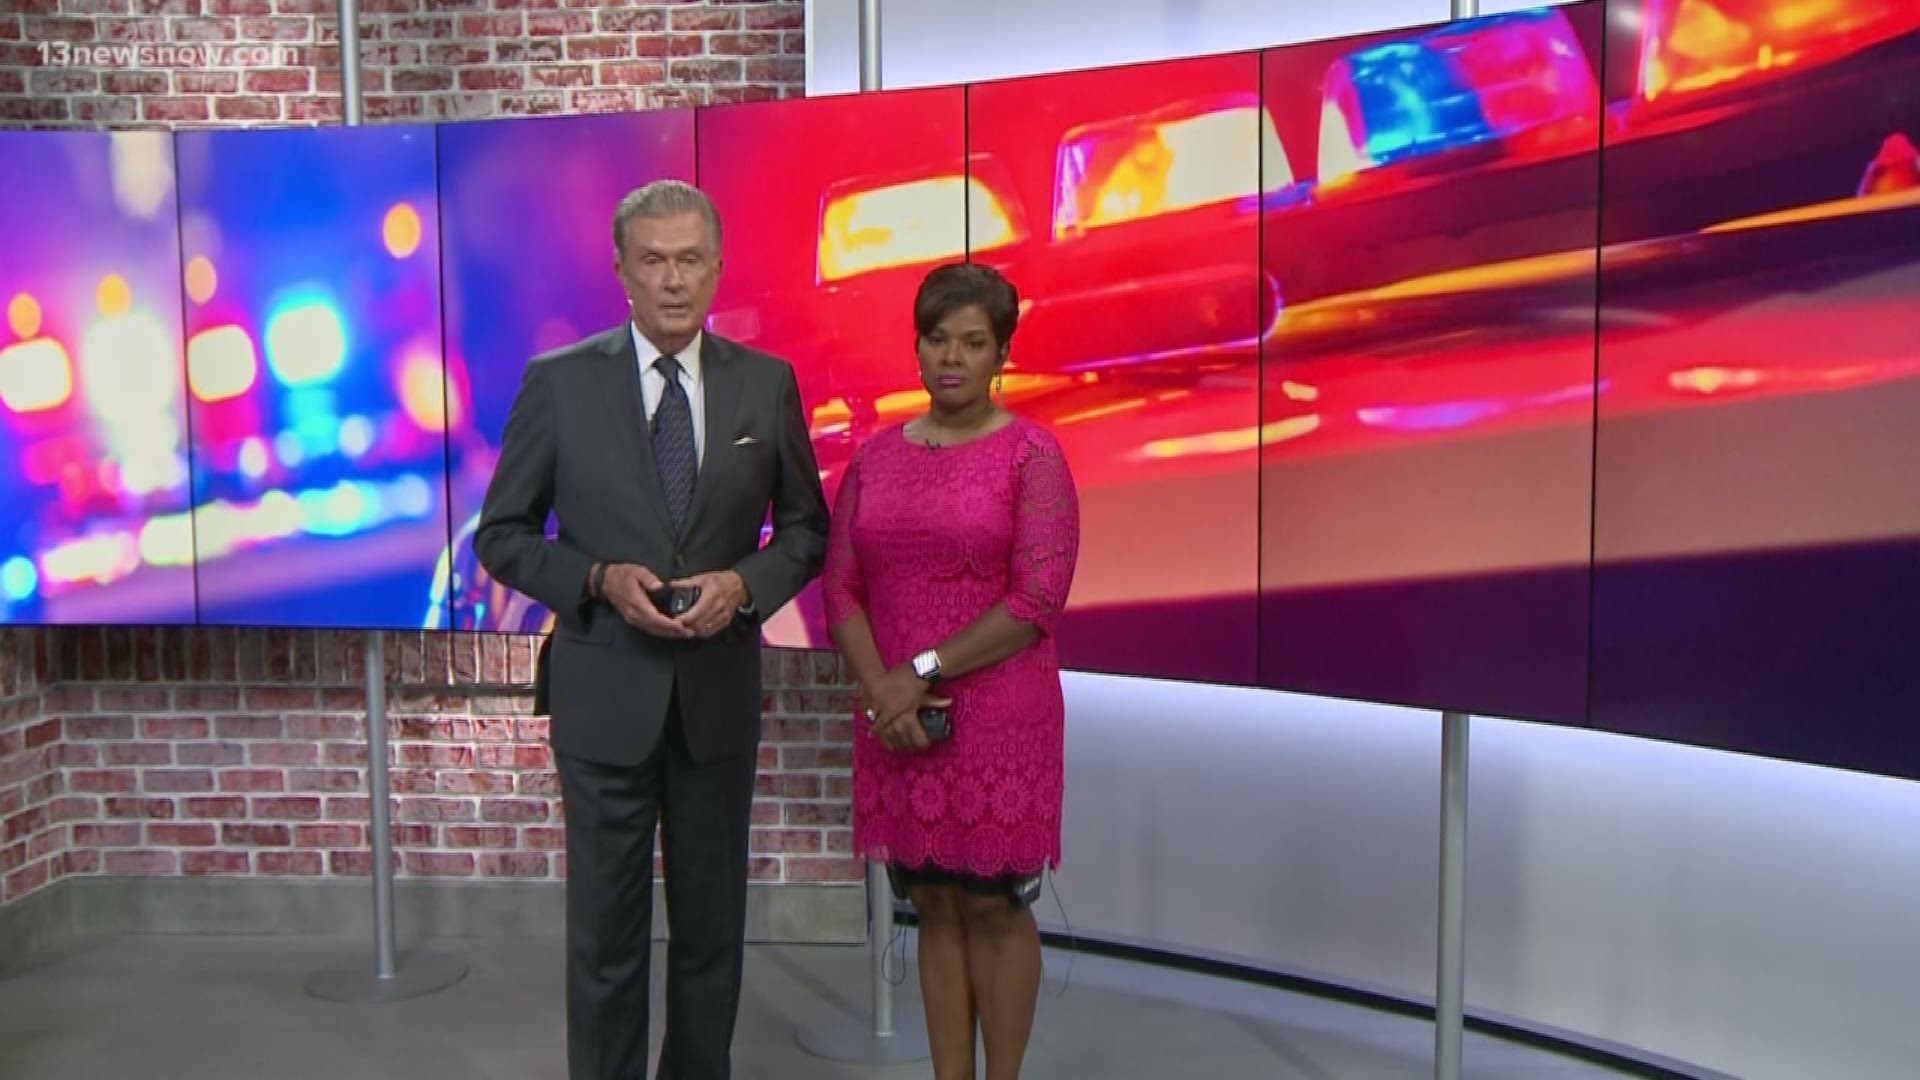 13News Now top headlines at 11 p.m. with Nicole Livas and David Alan for September 17.